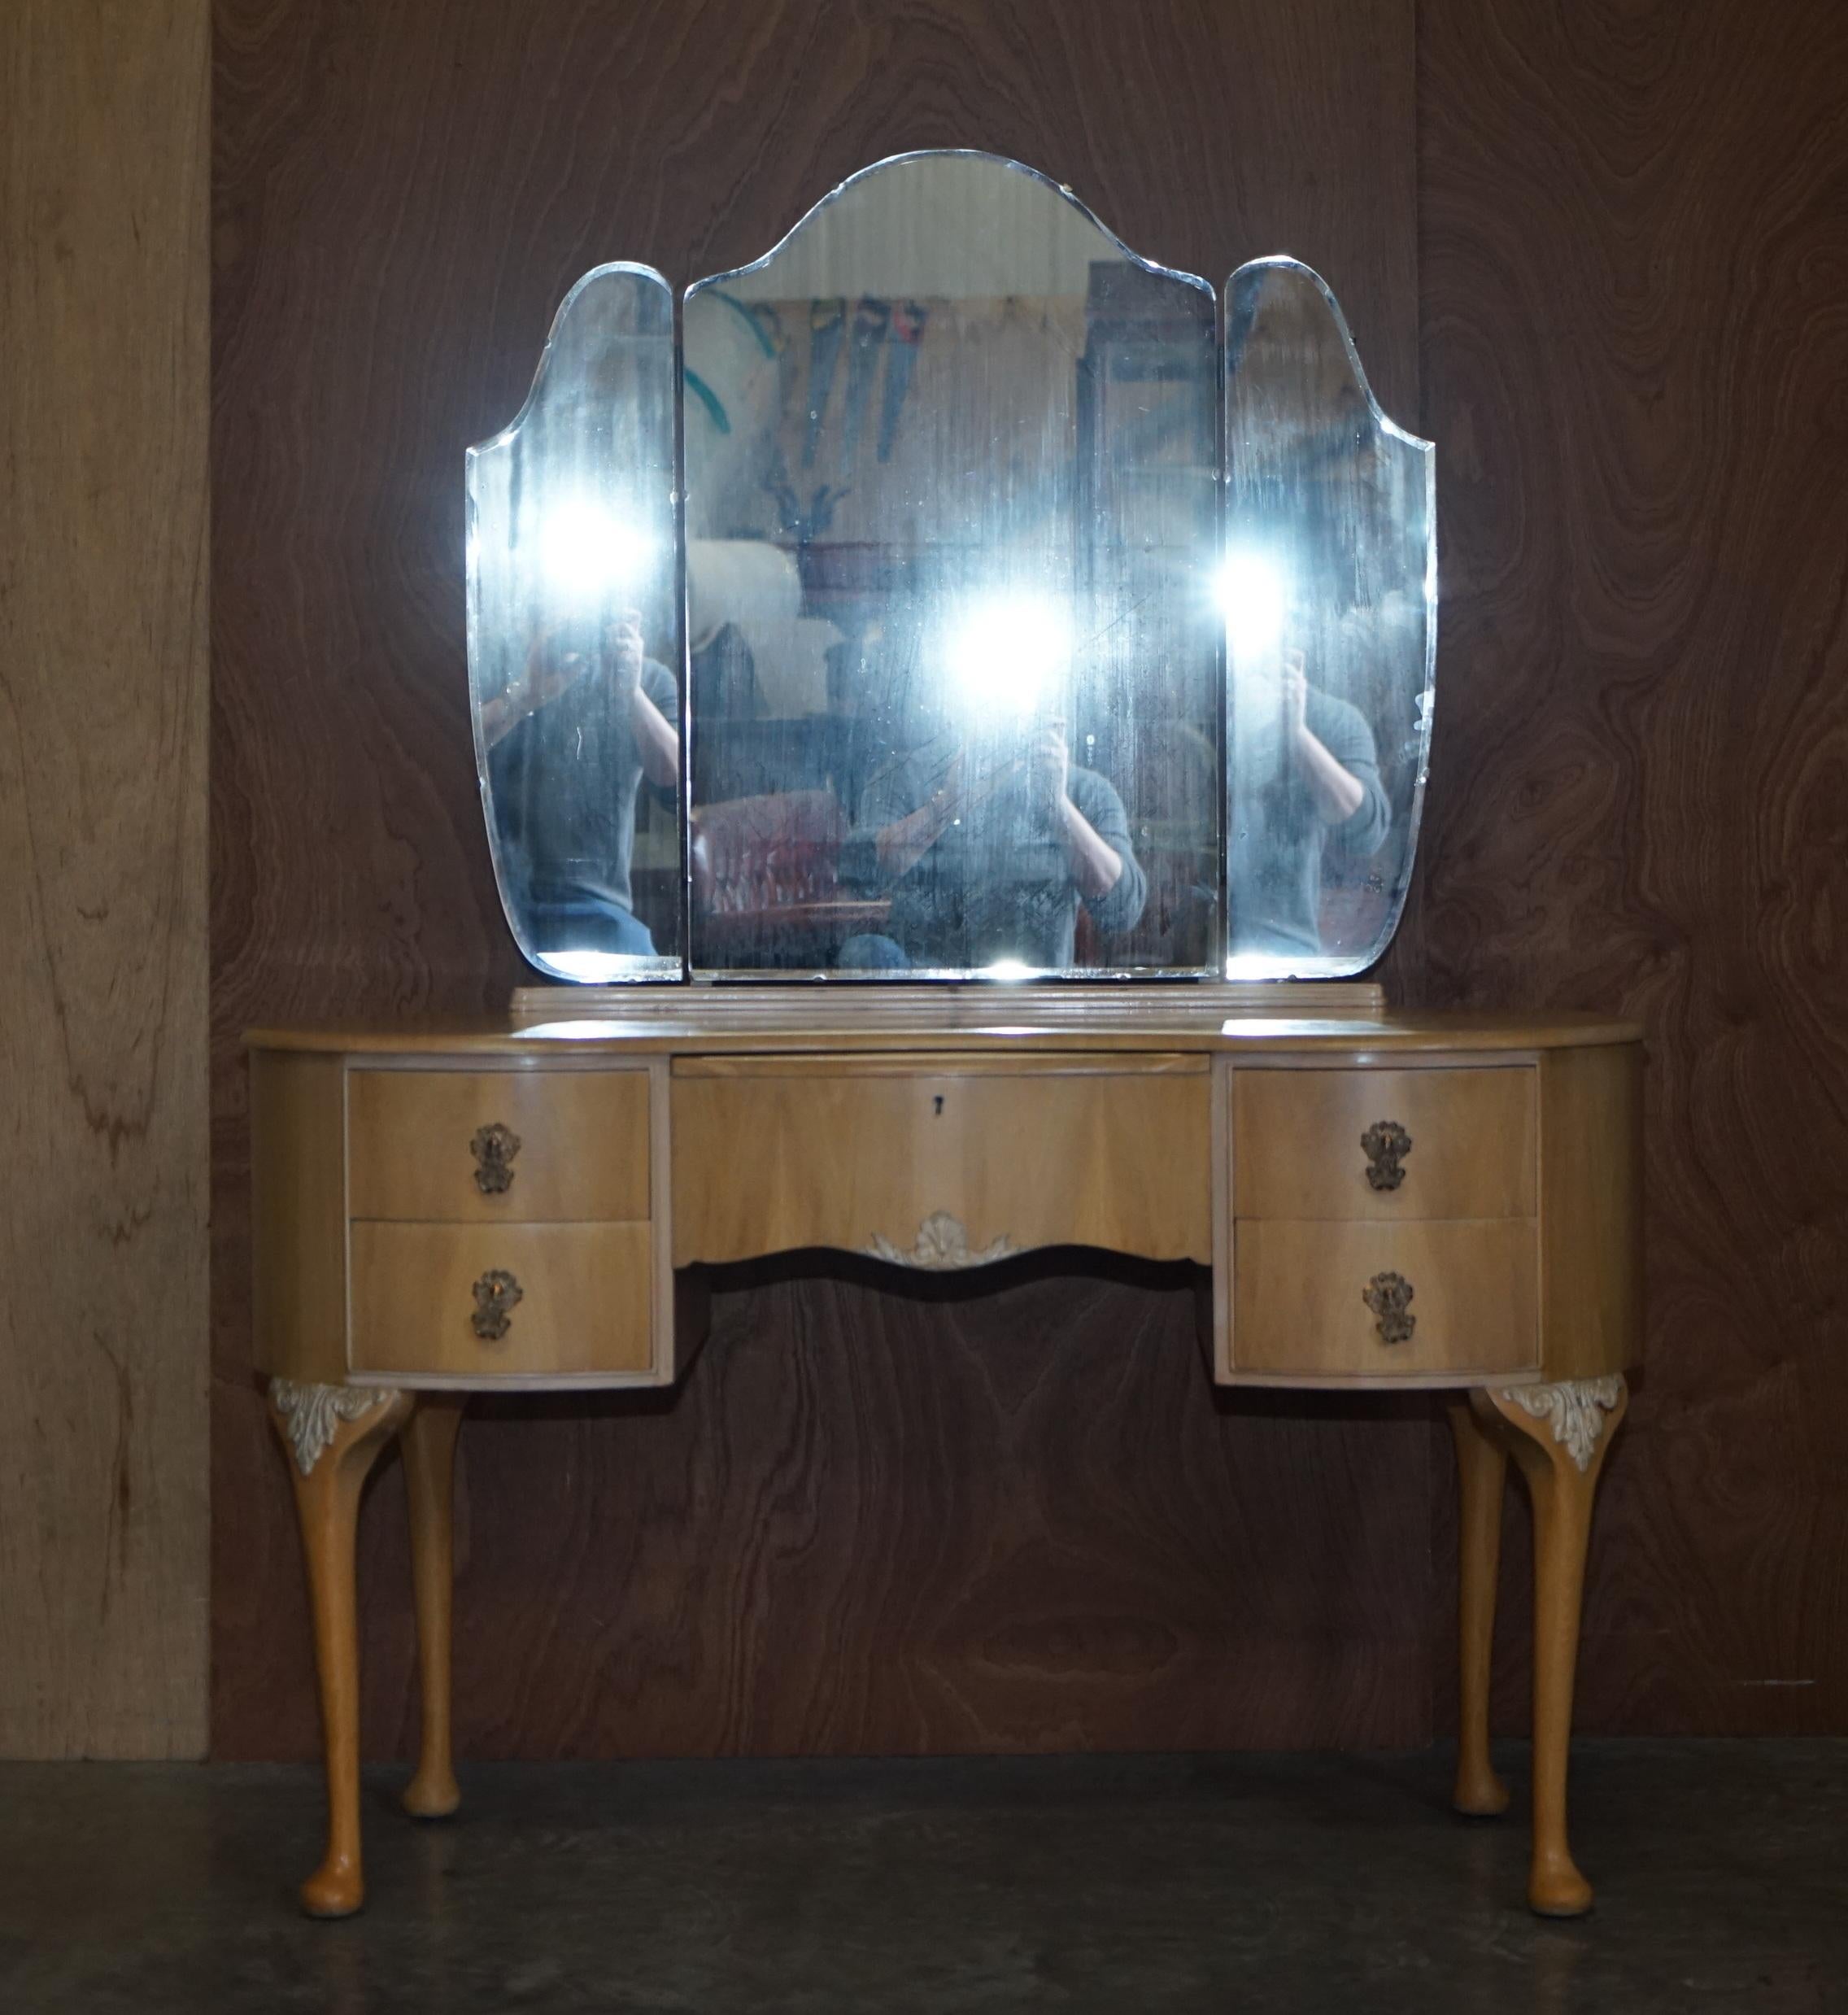 We are delighted to offer for sale a lovely circa 1940’s light Walnut Dressing table made by The Walnut Cabinet Works which is part of a large suite

This piece is part of a suite as mentioned, I have in total the dressing table, two wardrobes,